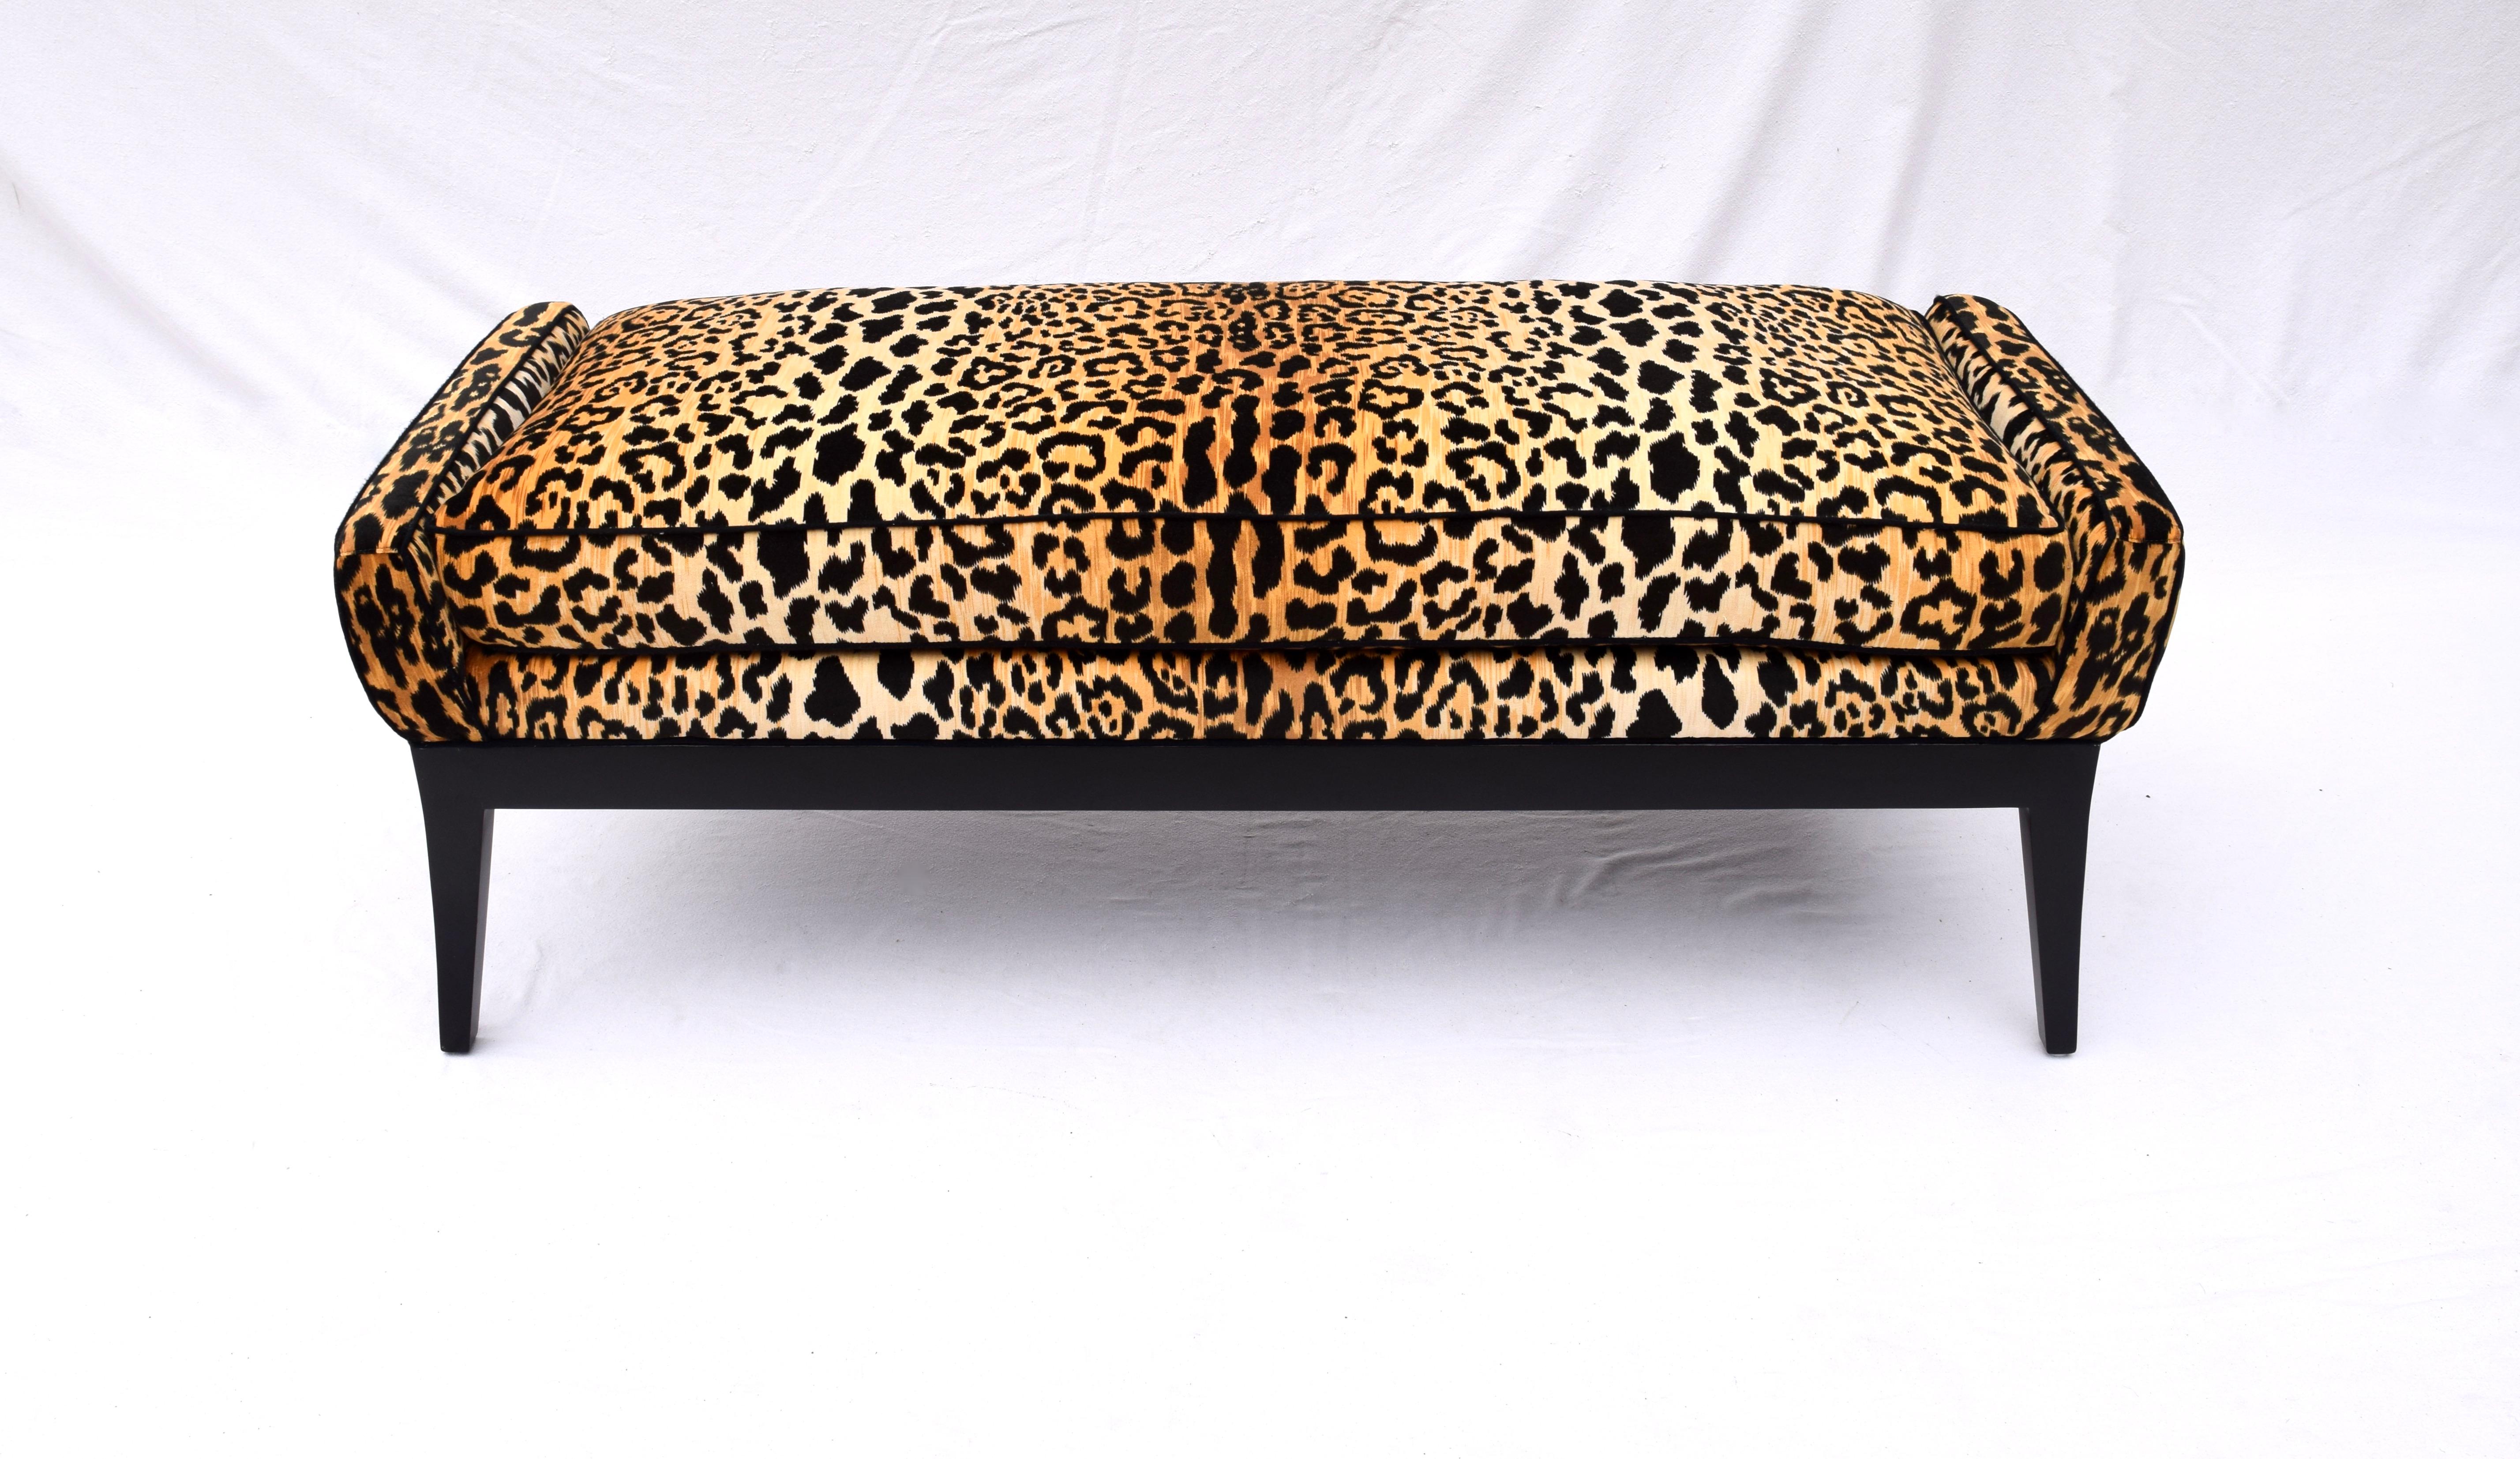 Fully restored Mid-Century Modern window bench attributed to Edward Wormley for Dunbar. Splay leg design constructed of newly black lacquered hardwood frame. Stationary plush single cushion is upholstered in leopard velvet accented with black welt